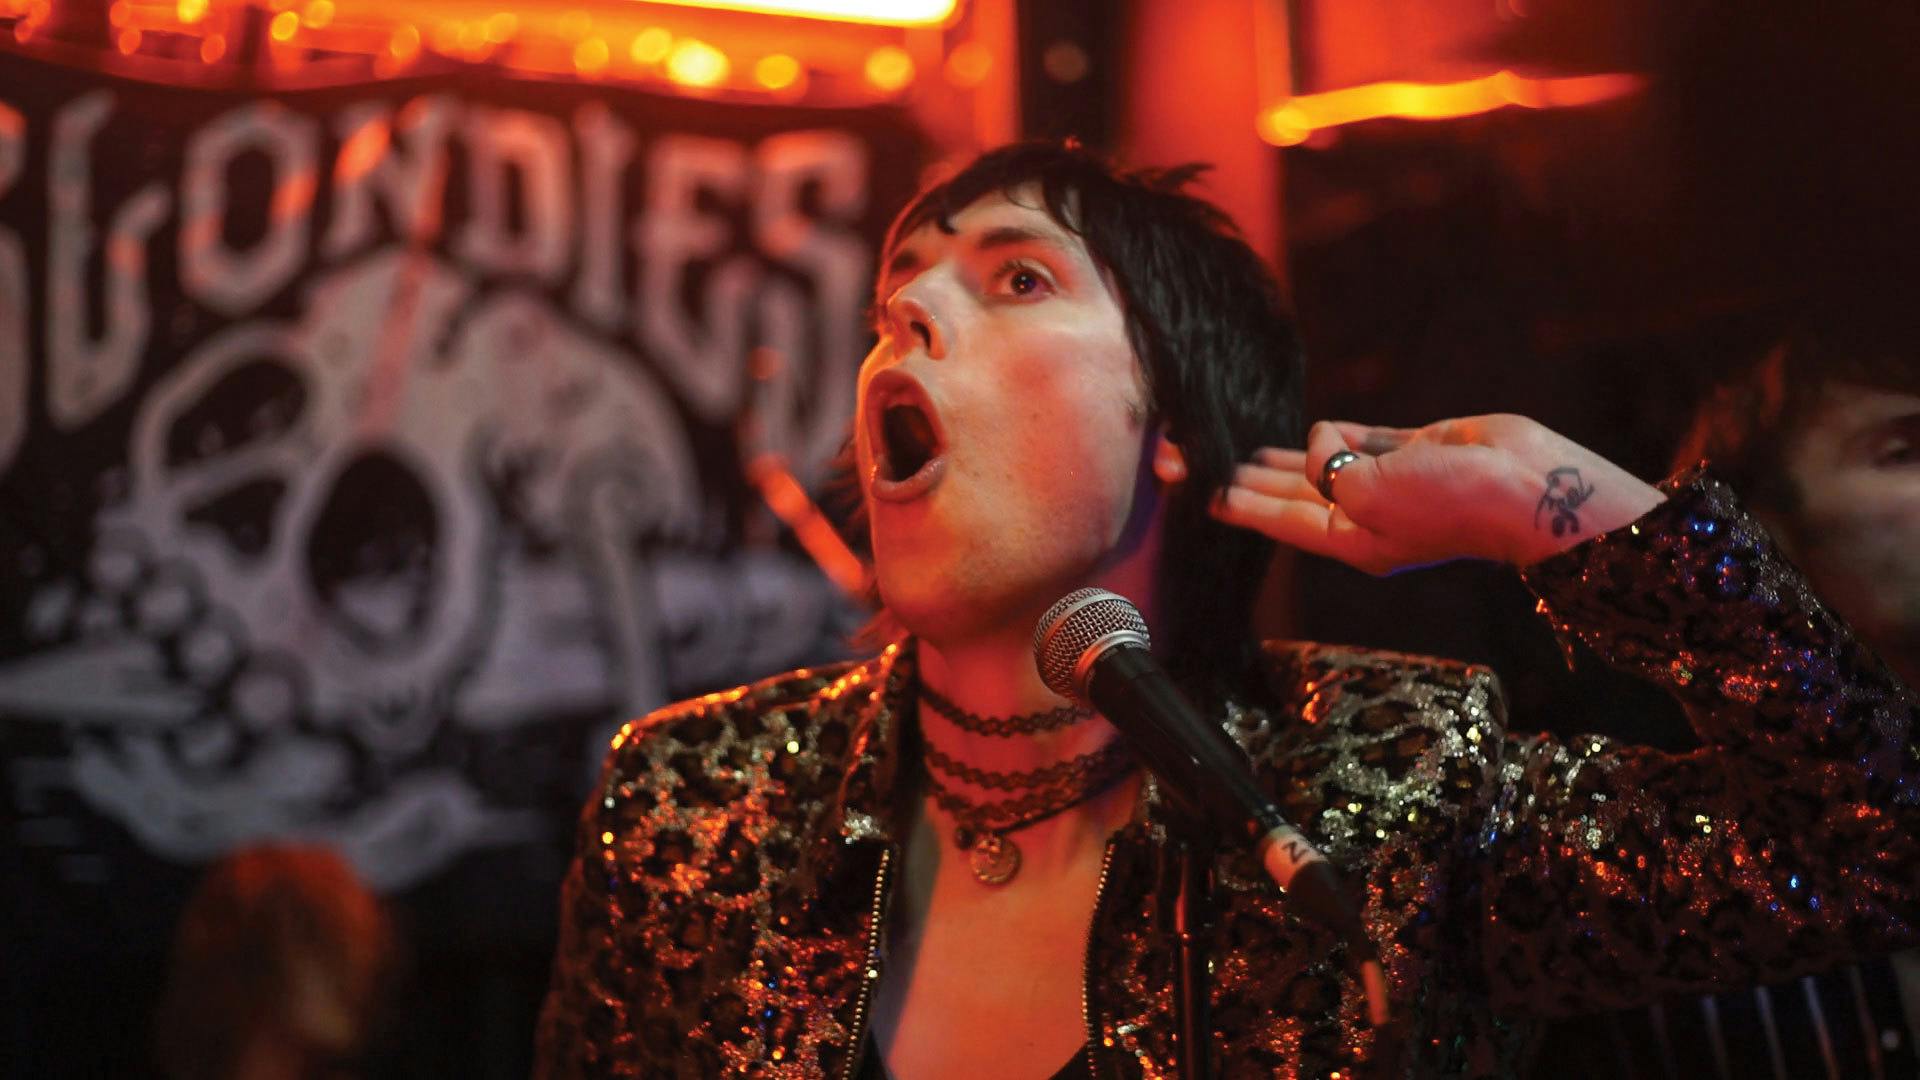 Watch The Struts bring the rock’n’roll to a London dive bar